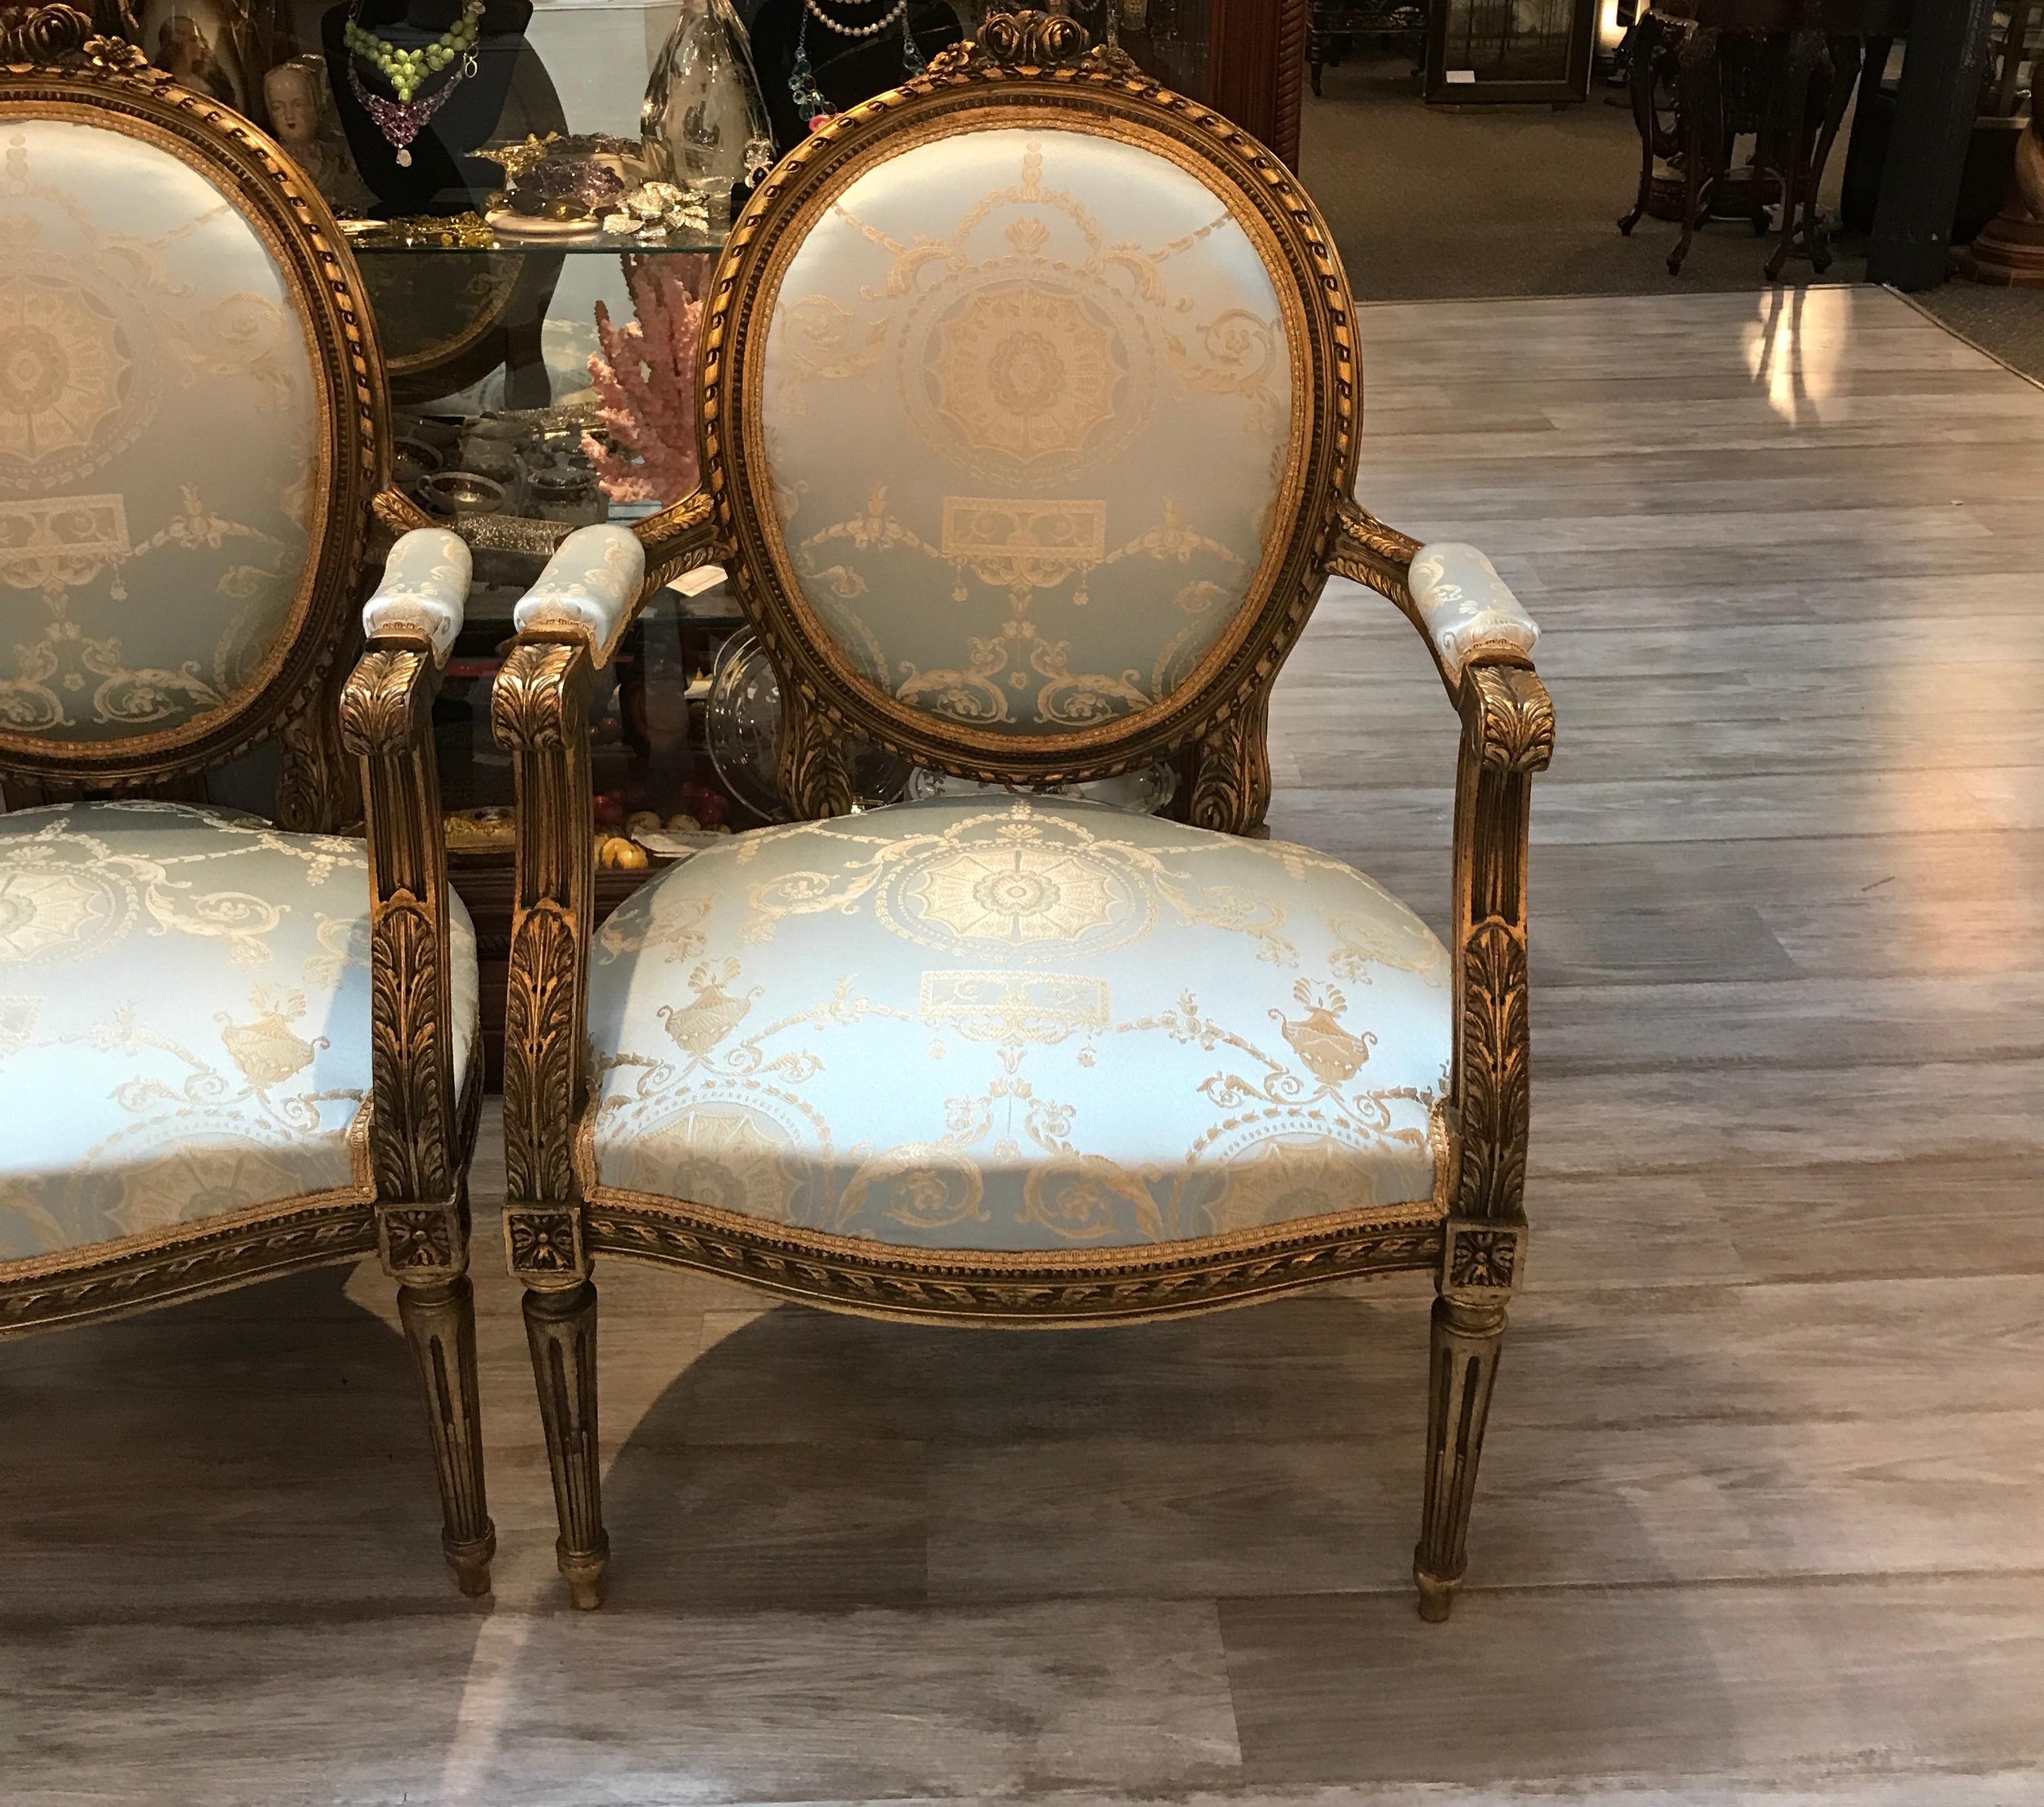 Of typical form, the oval back with bowed top and beautiful carved open arms. Bound reed motif on frame with acanthus leaf appointments. The chair rests on Classic reeded tapered legs. These chairs are newly recovered in an elegant Marie Antoinette